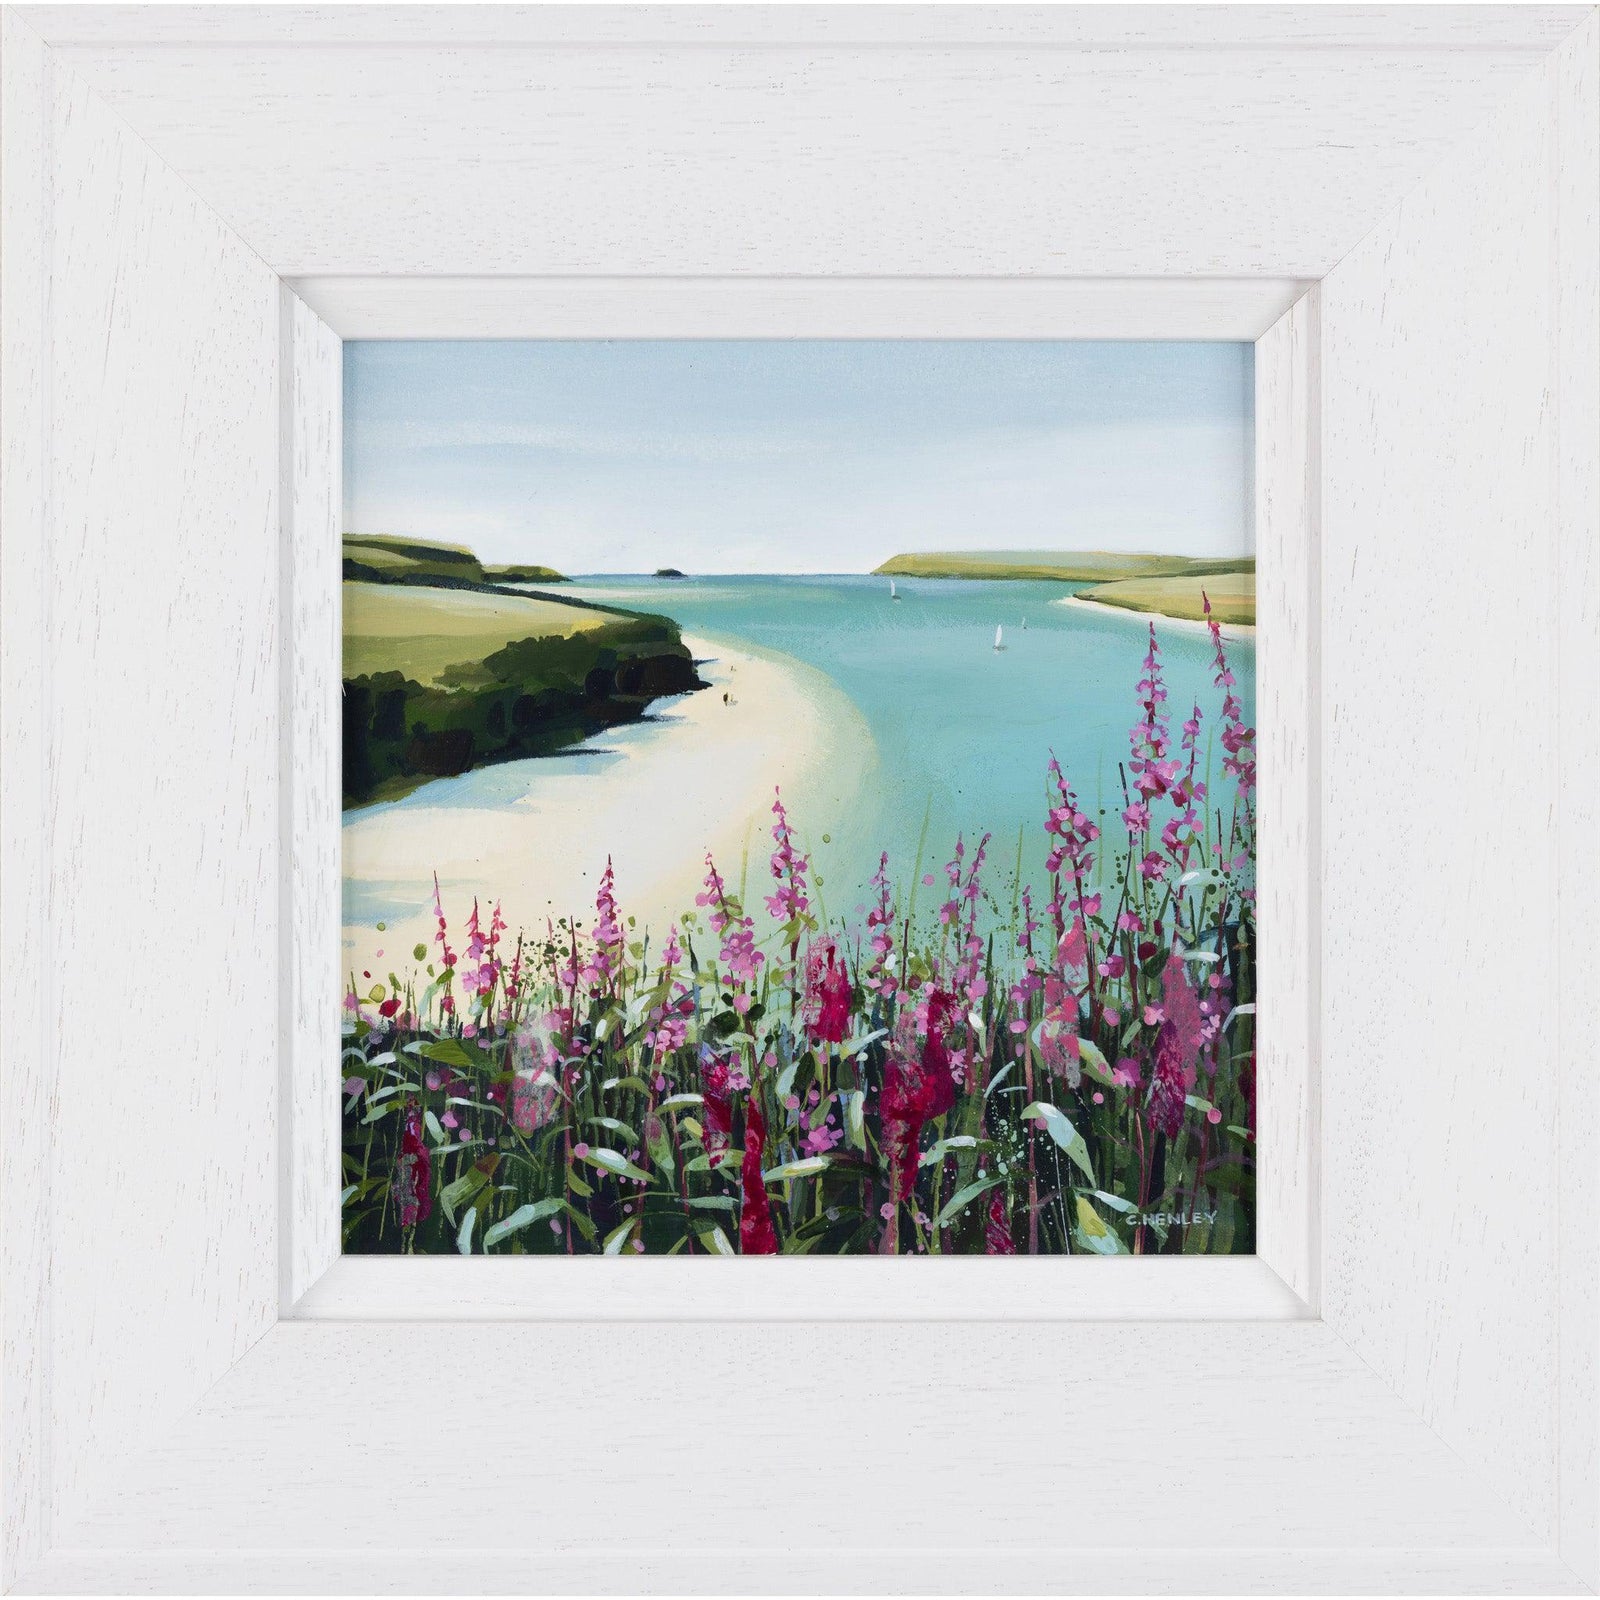 'Willowherb by the Camel Estuary' a mixed media original by Claire Henley, available at Padstow Gallery, Cornwall